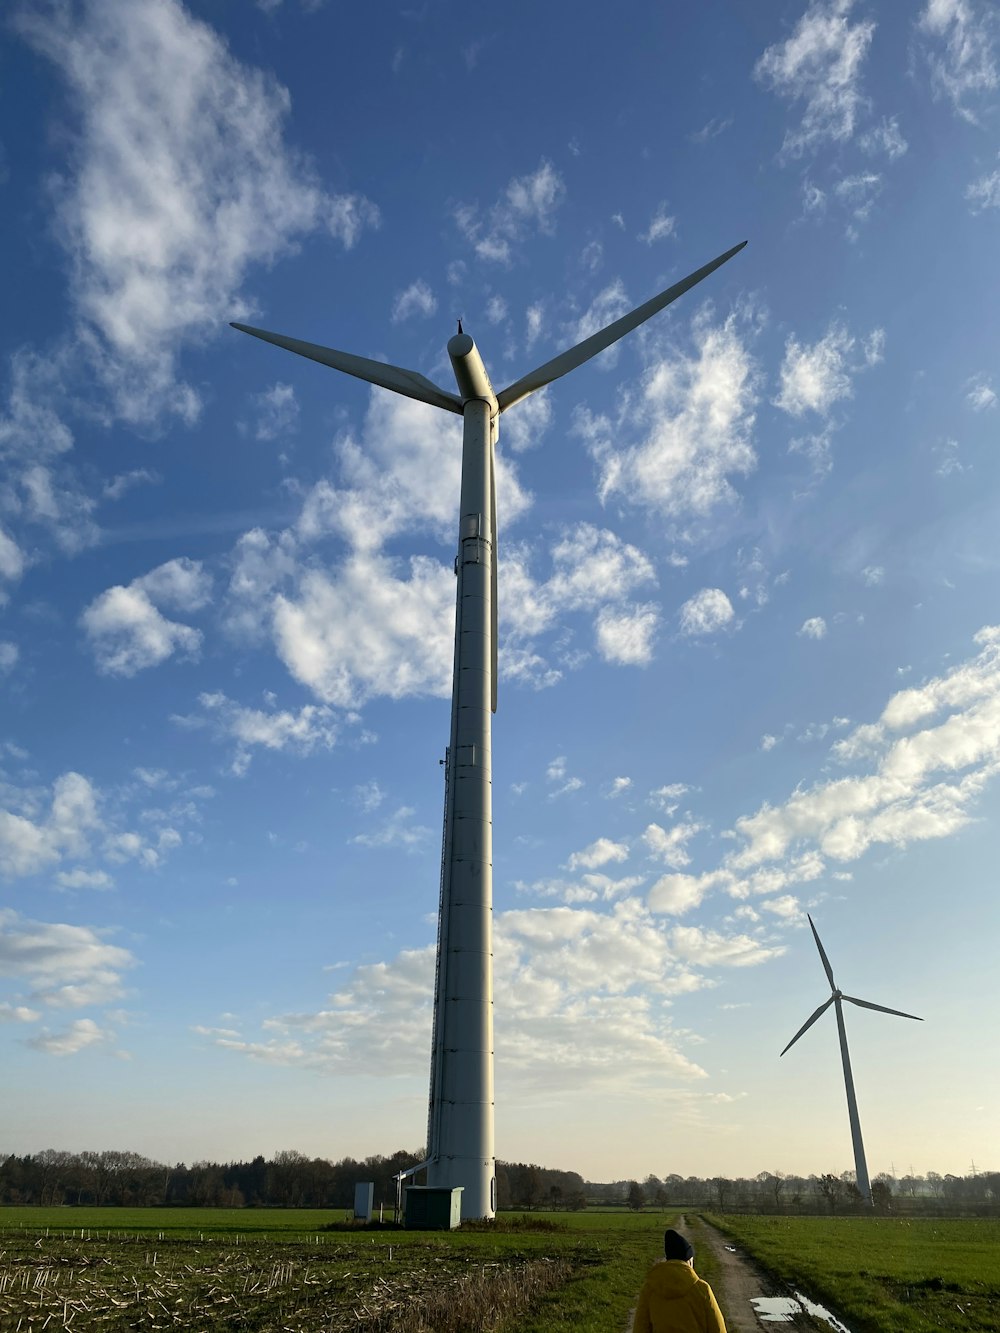 black wind turbine under blue sky and white clouds during daytime